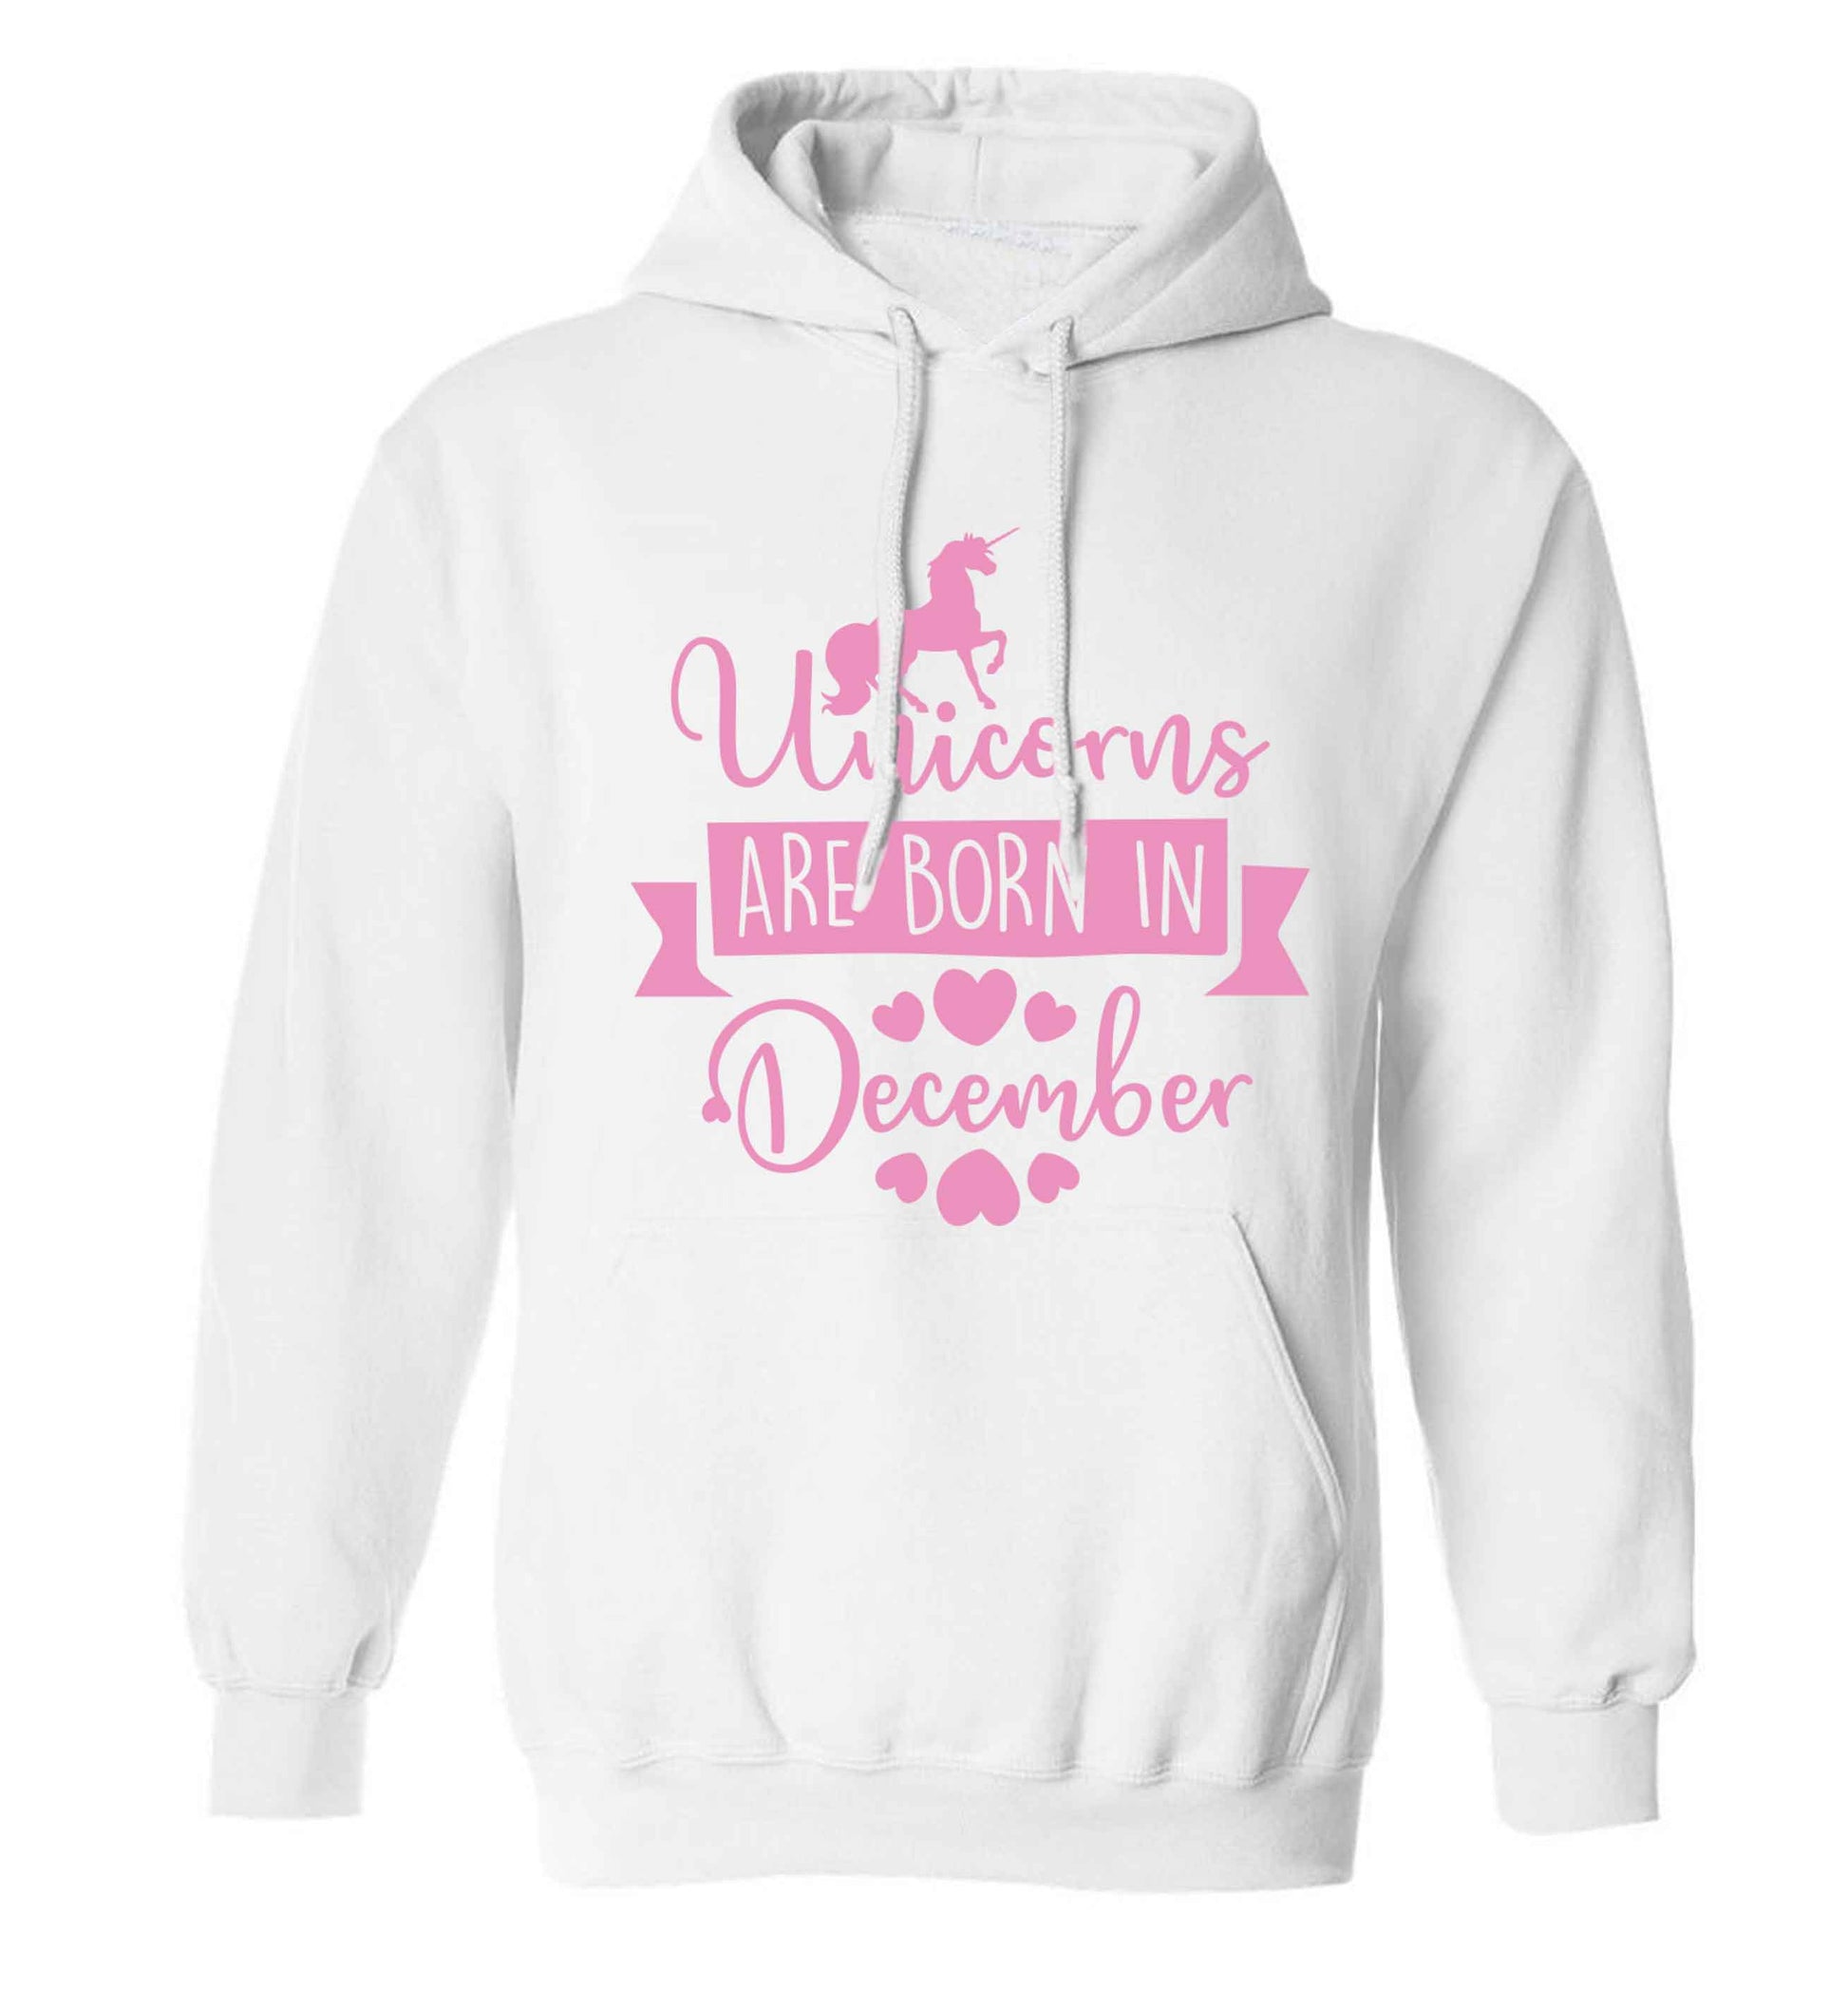 Unicorns are born in December adults unisex white hoodie 2XL